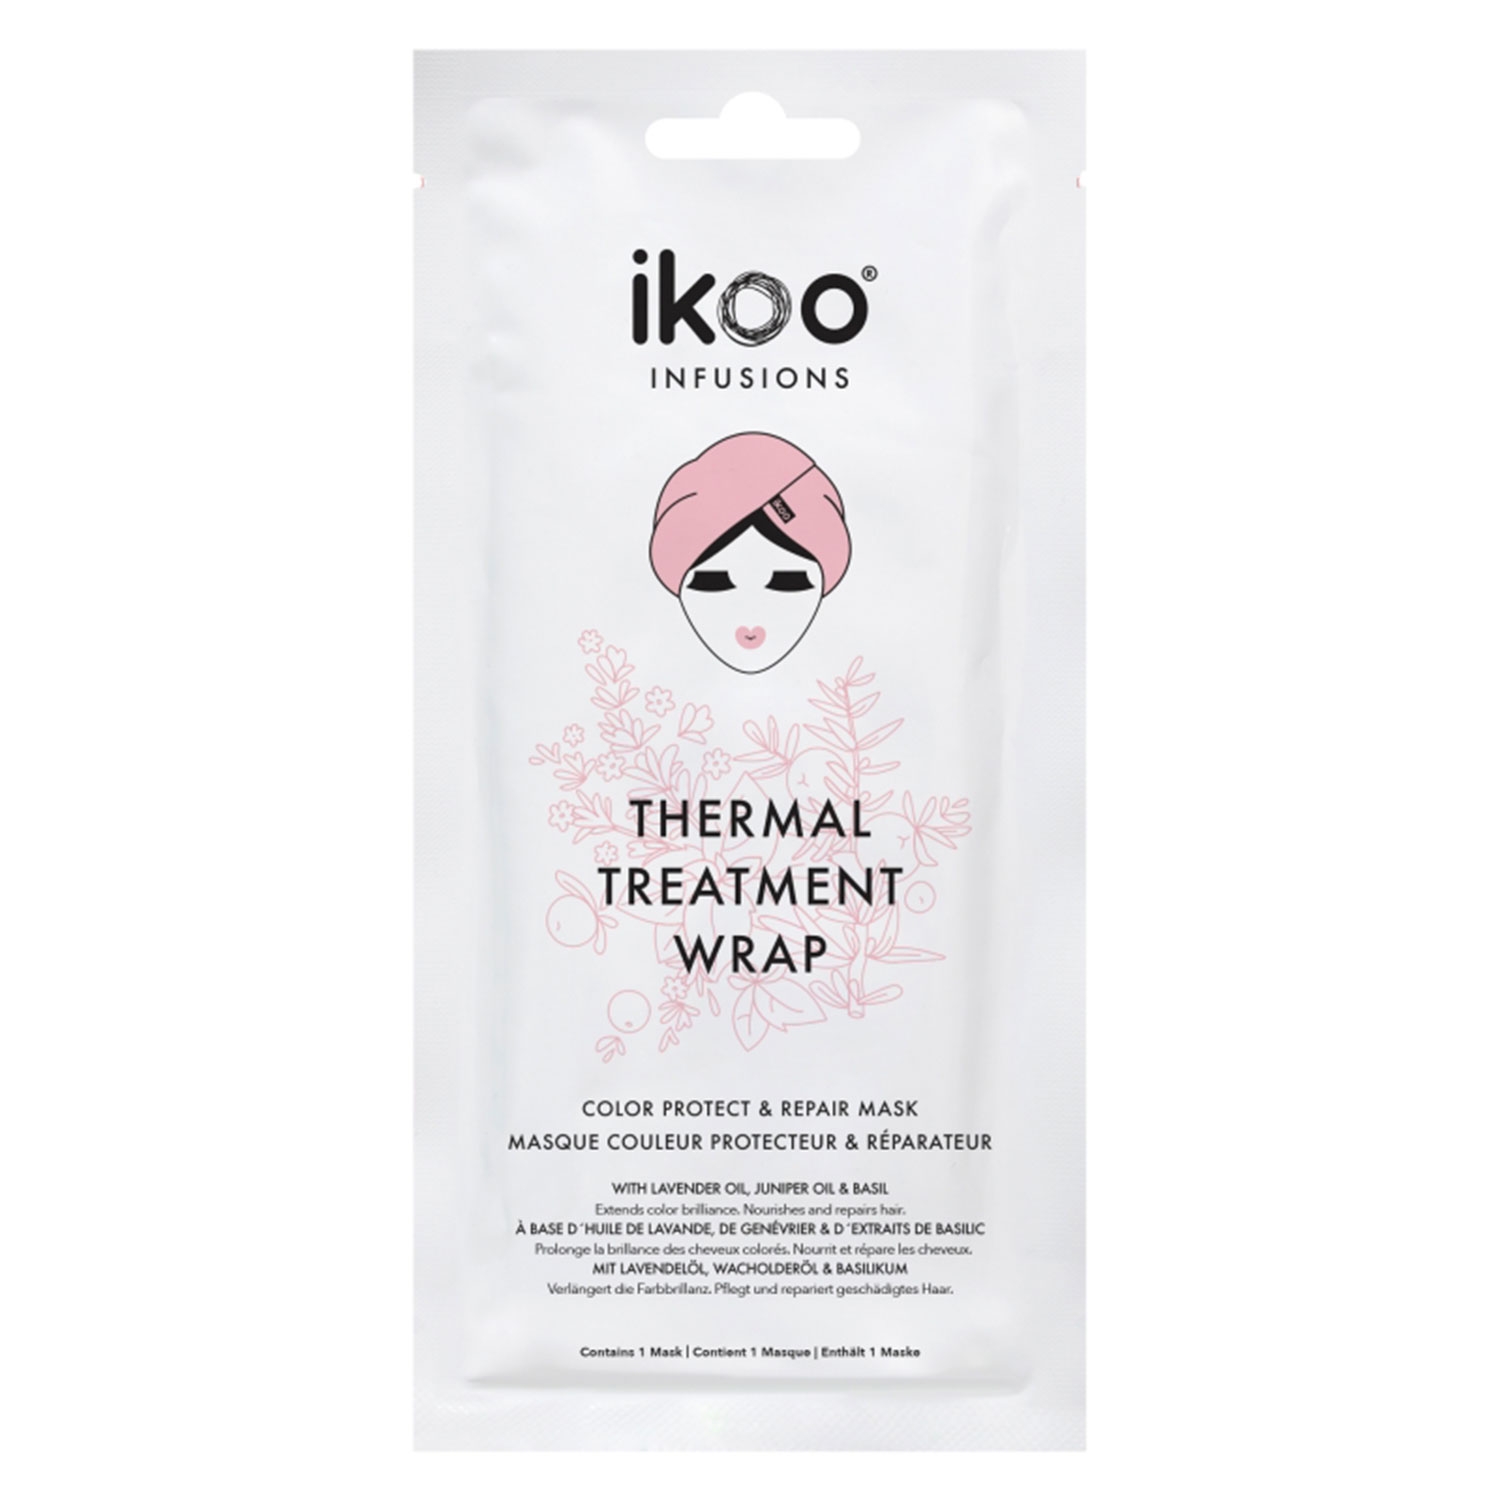 Produktbild von ikoo infusions - Color Protect & Repair Thermal Treatment Wrap